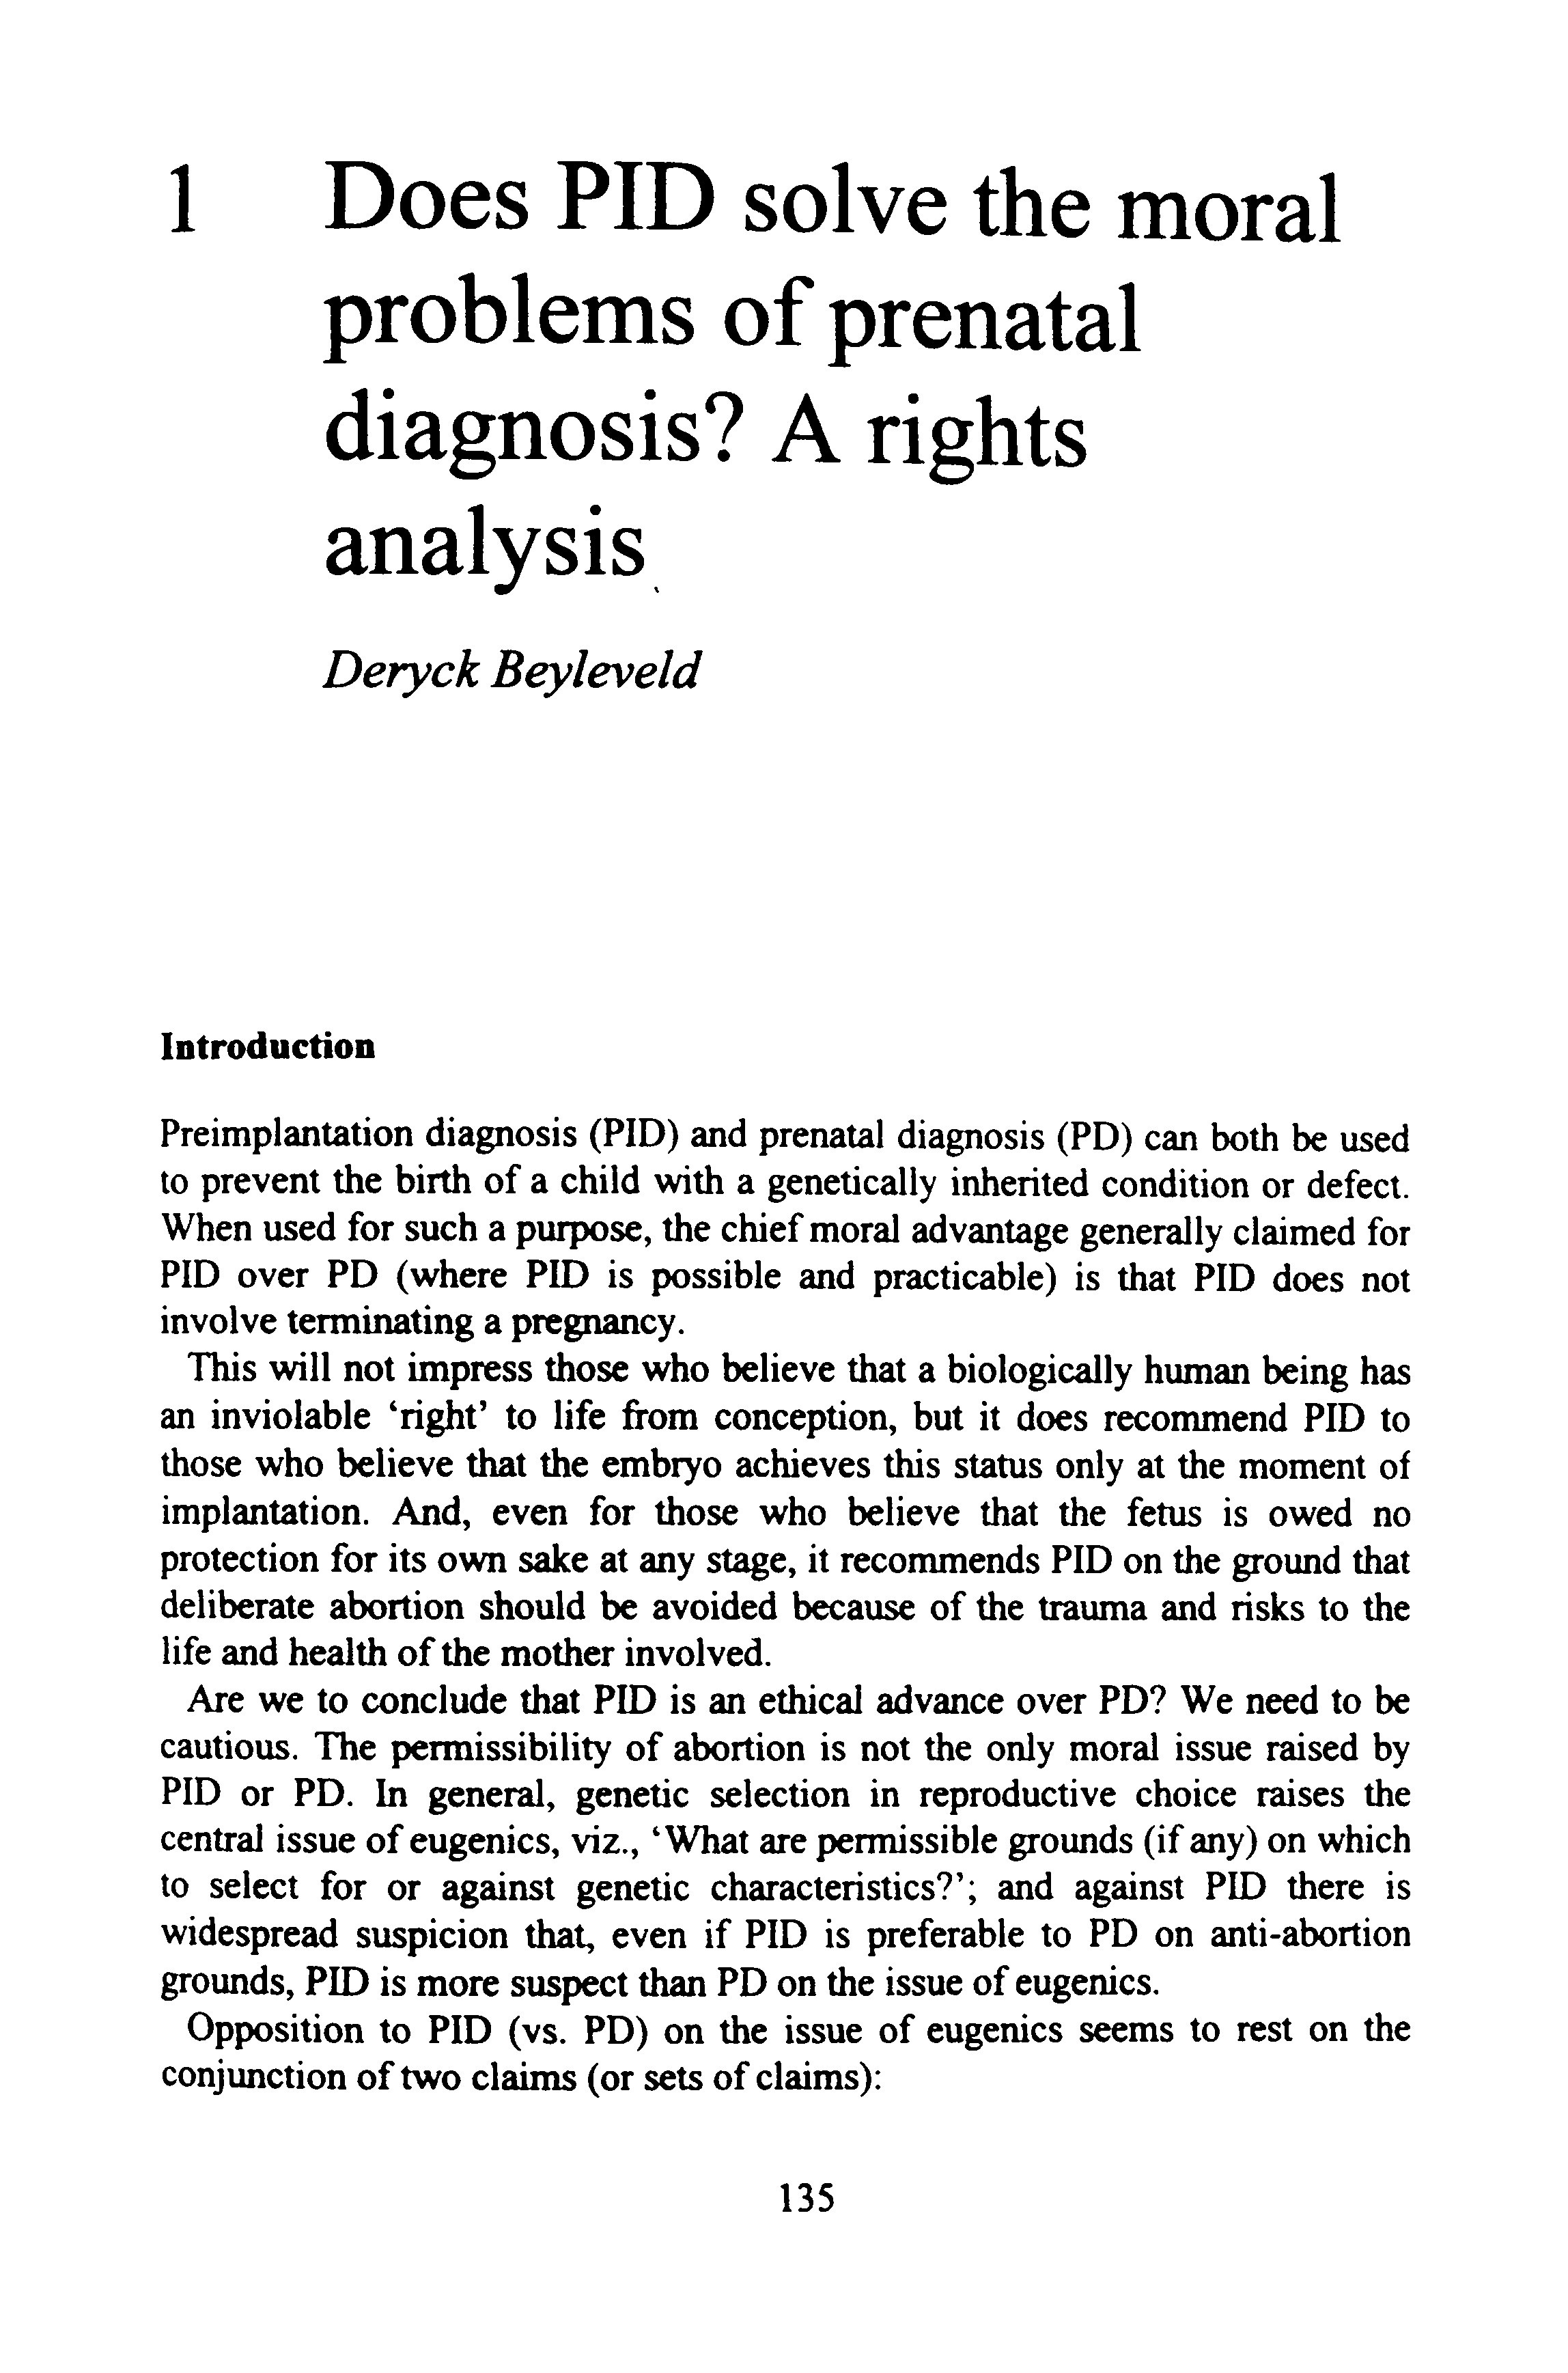 Does PID Solve the Moral Problems of Prenatal Diagnosis? A Rights Analysis Thumbnail